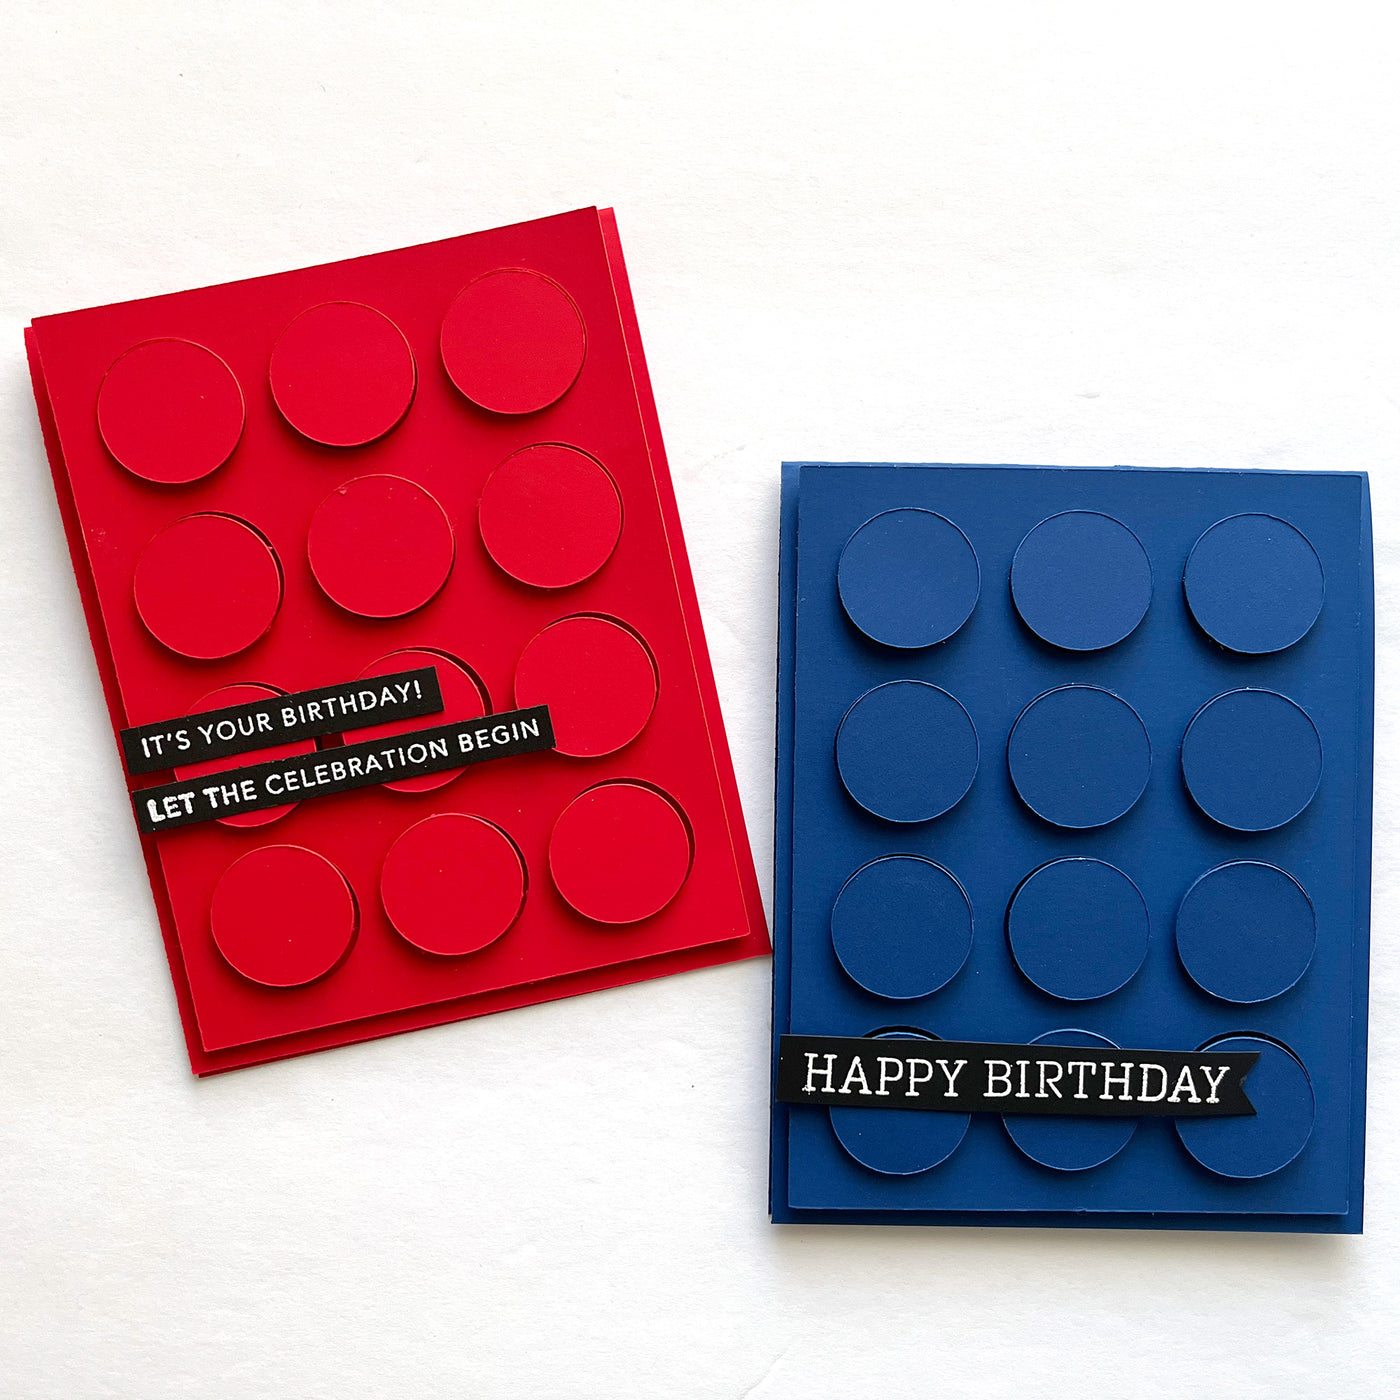 red lego card featuring plike